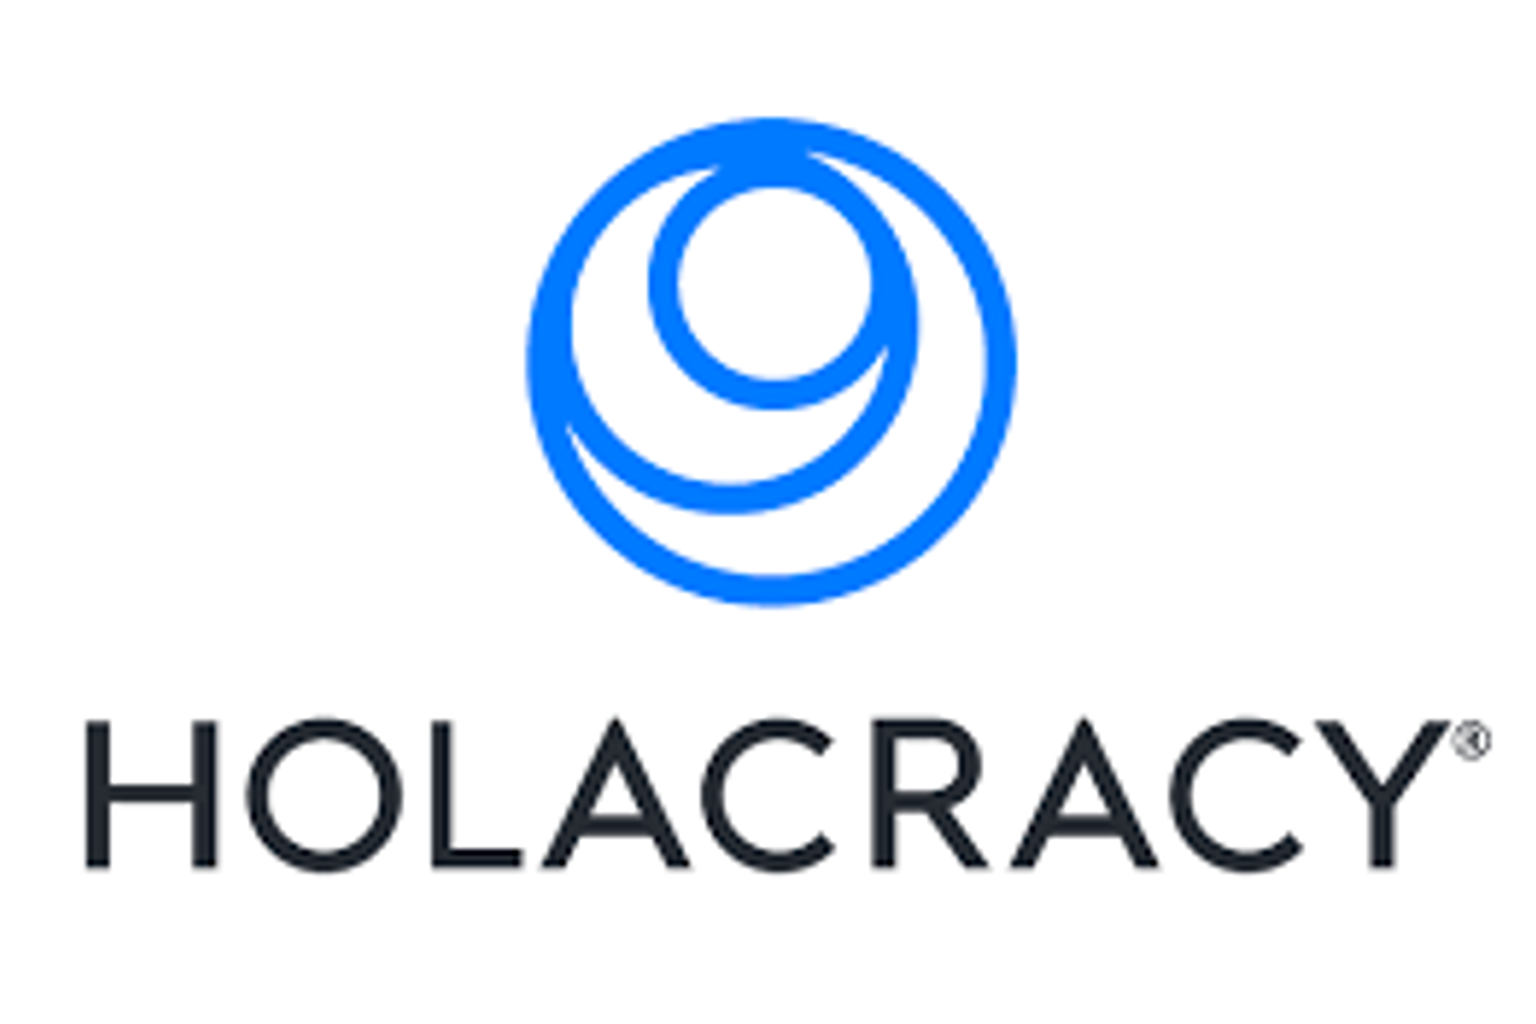 Holacracy: What does that mean in our daily practice?